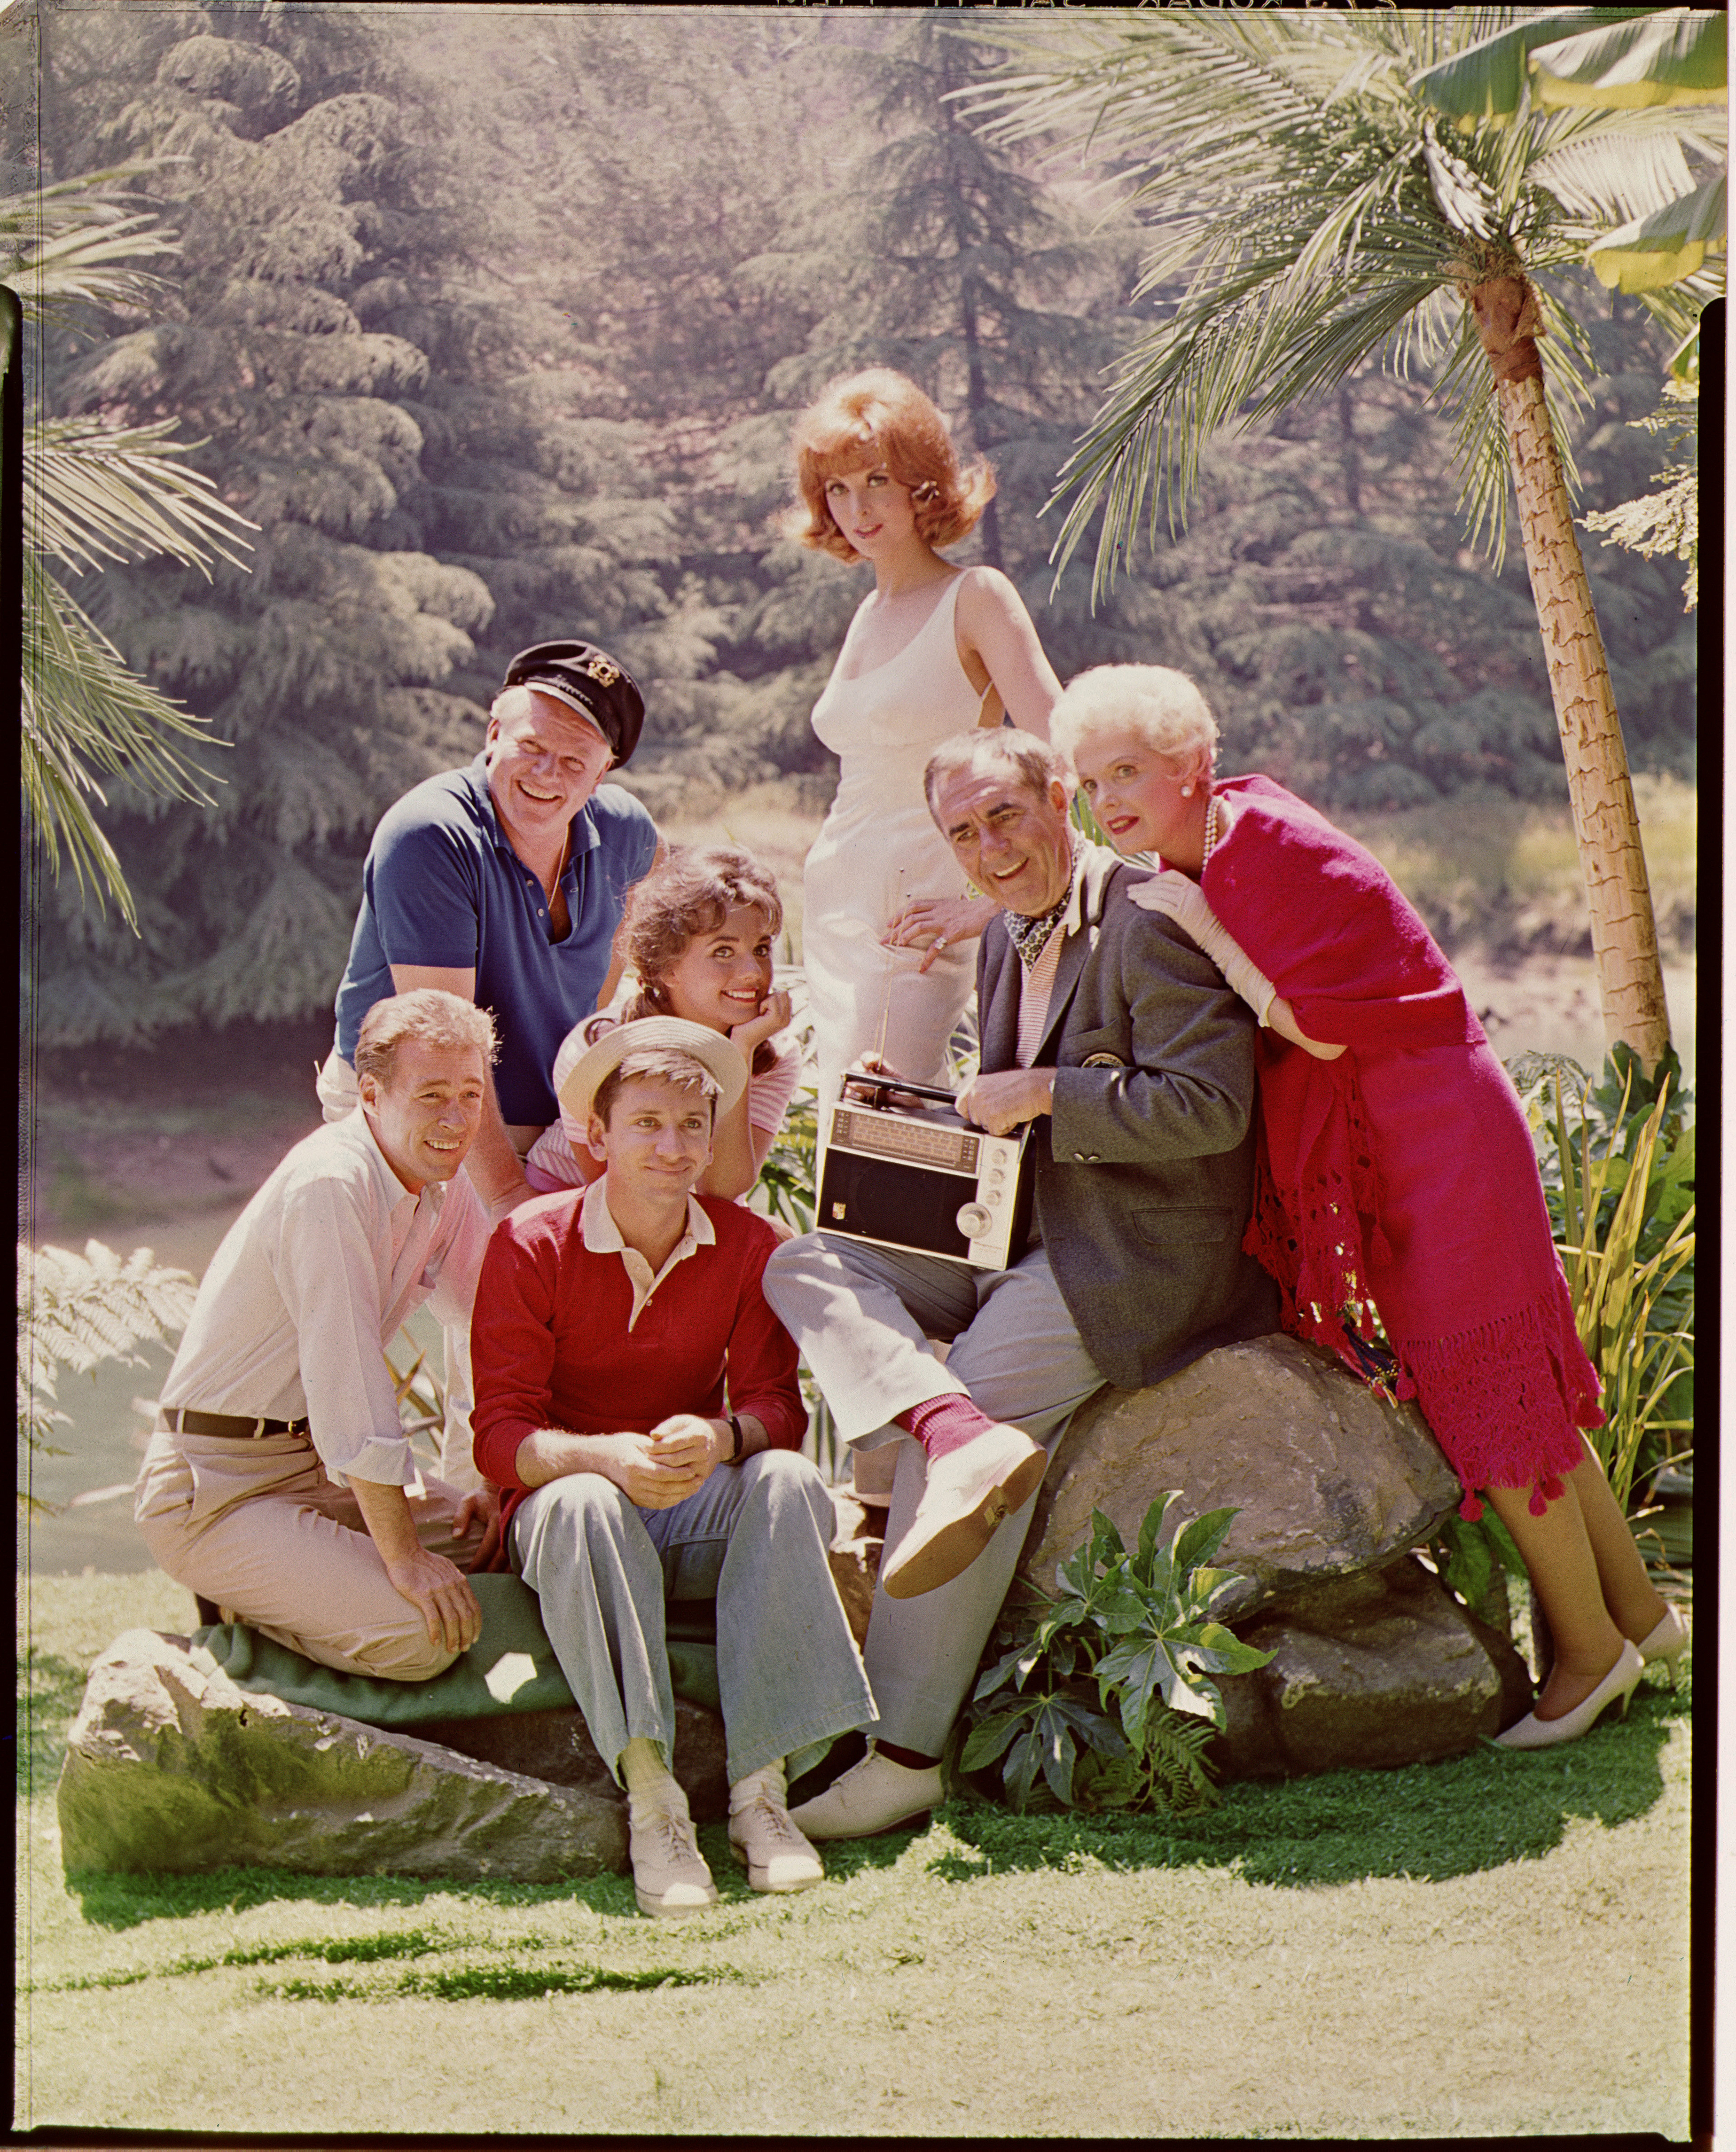 Promotional portrait shows the cast of 'Gilligan's Island' as they listen to a portable radio, early 1960s. | Source: Getty Images